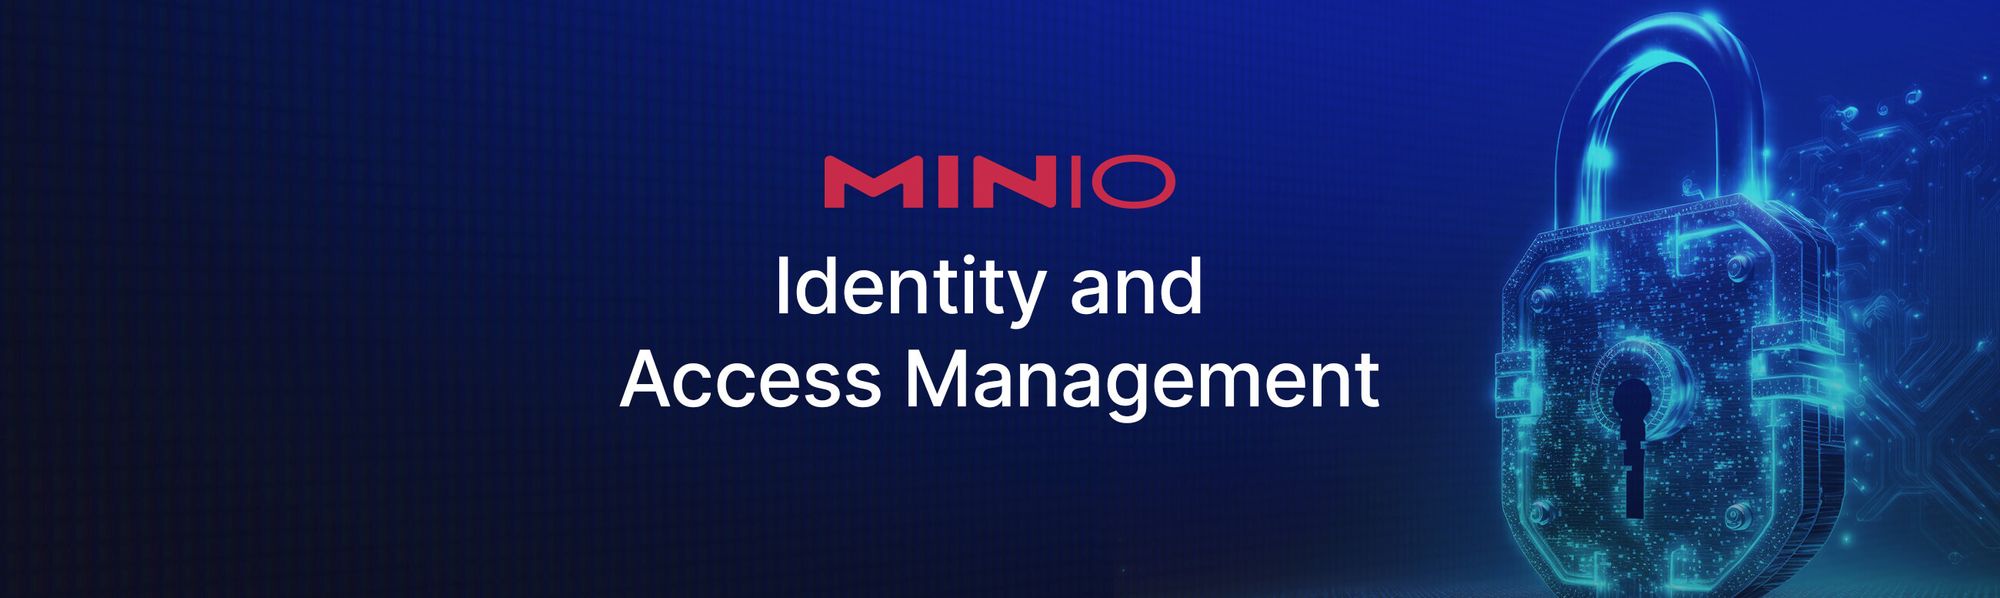 YouTube Summaries: Identity and Access Management